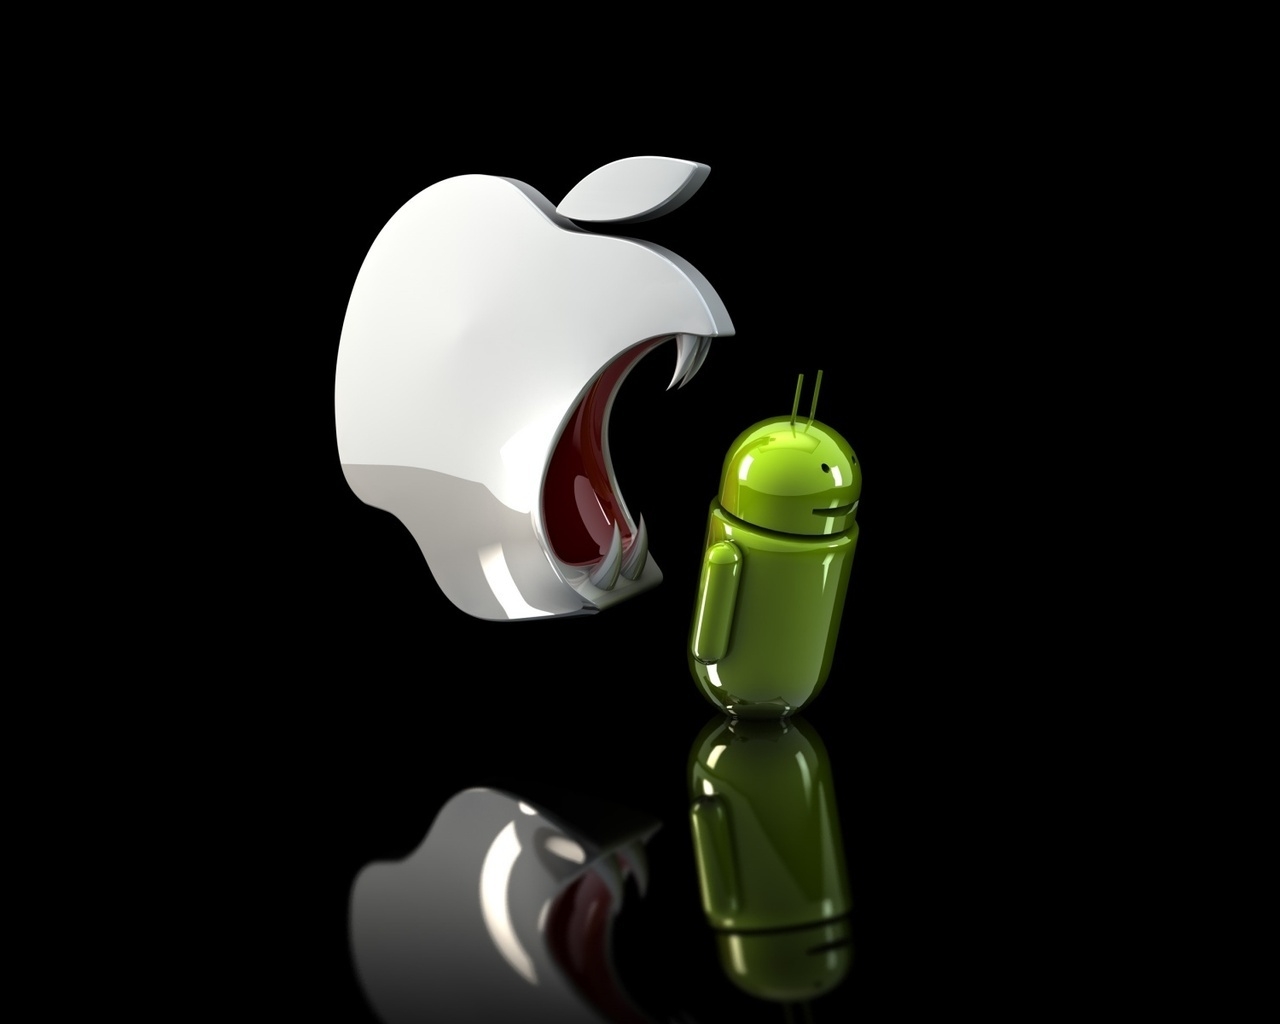 Apple Ready To Eat Android for 1280 x 1024 resolution